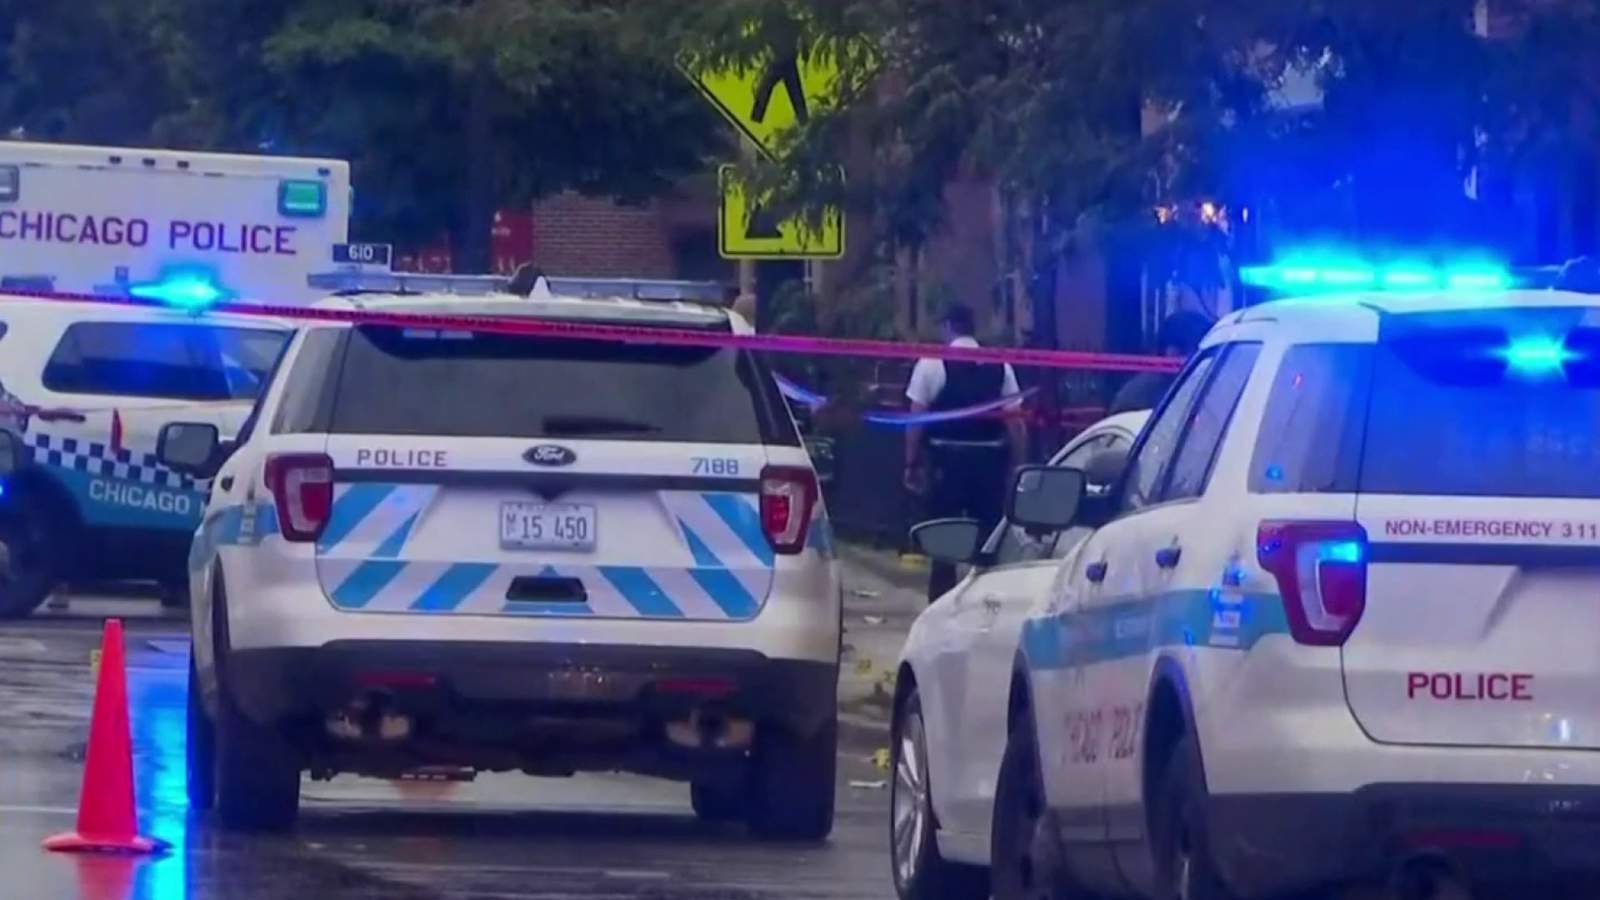 Cops: 14 injured after shooting outside Chicago funeral home